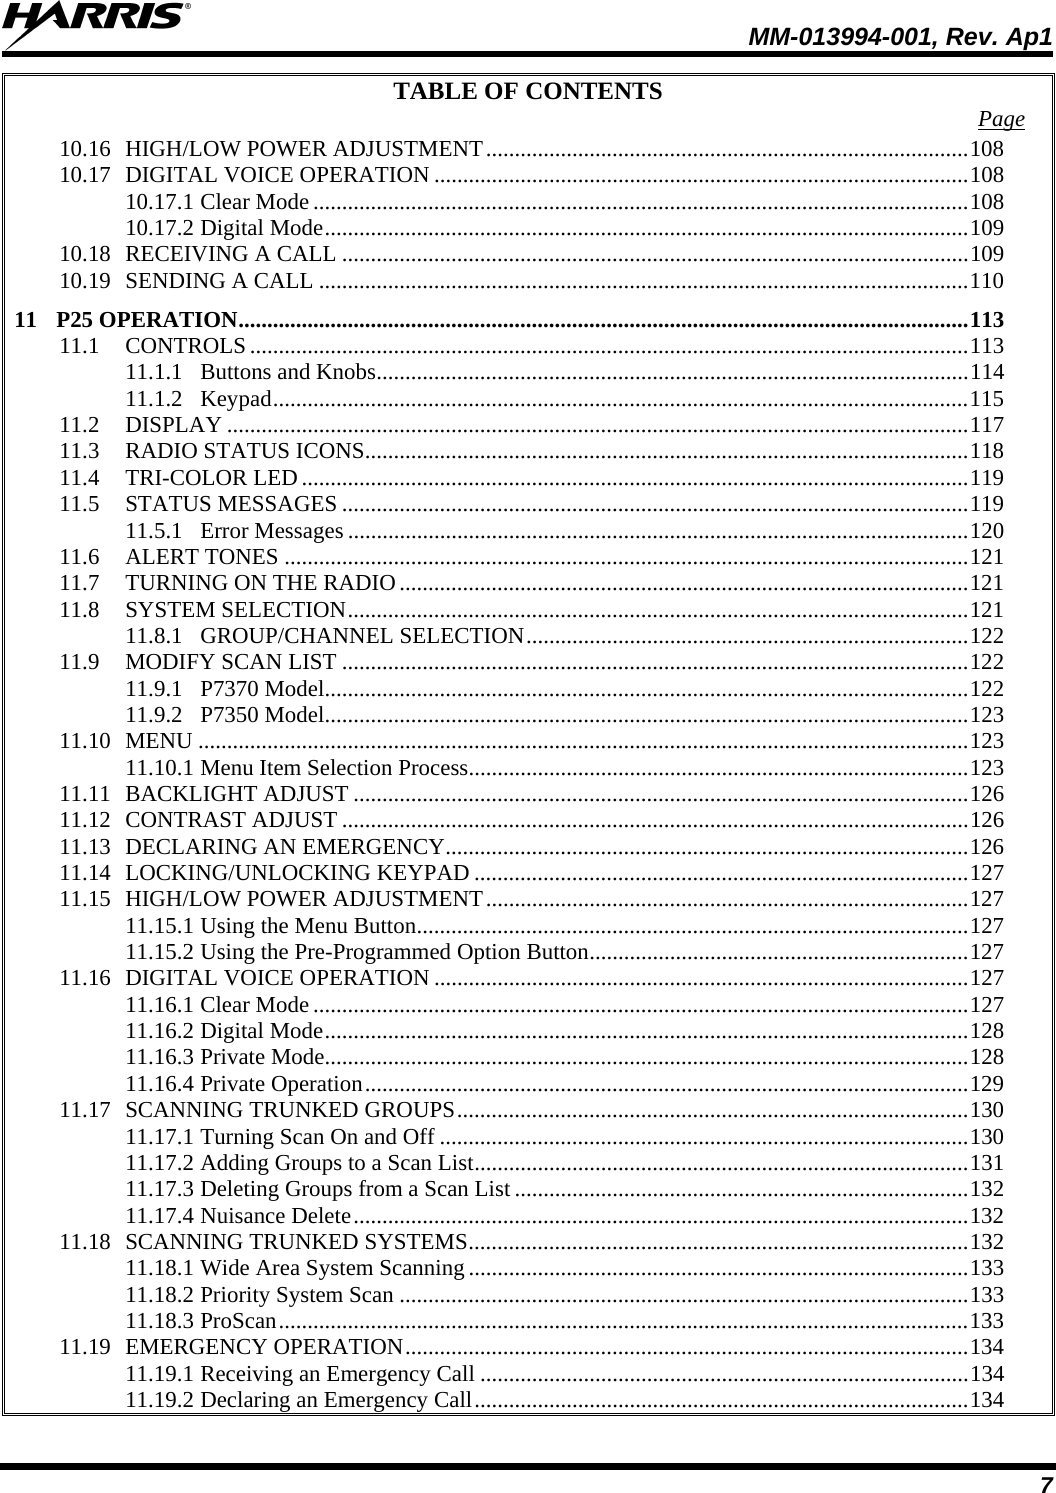  MM-013994-001, Rev. Ap1 7 TABLE OF CONTENTS  Page 10.16 HIGH/LOW POWER ADJUSTMENT....................................................................................108 10.17 DIGITAL VOICE OPERATION .............................................................................................108 10.17.1 Clear Mode ..................................................................................................................108 10.17.2 Digital Mode................................................................................................................109 10.18 RECEIVING A CALL .............................................................................................................109 10.19 SENDING A CALL .................................................................................................................110 11 P25 OPERATION...............................................................................................................................113 11.1 CONTROLS.............................................................................................................................113 11.1.1 Buttons and Knobs.......................................................................................................114 11.1.2 Keypad.........................................................................................................................115 11.2 DISPLAY .................................................................................................................................117 11.3 RADIO STATUS ICONS.........................................................................................................118 11.4 TRI-COLOR LED....................................................................................................................119 11.5 STATUS MESSAGES .............................................................................................................119 11.5.1 Error Messages ............................................................................................................120 11.6 ALERT TONES .......................................................................................................................121 11.7 TURNING ON THE RADIO...................................................................................................121 11.8 SYSTEM SELECTION............................................................................................................121 11.8.1 GROUP/CHANNEL SELECTION.............................................................................122 11.9 MODIFY SCAN LIST .............................................................................................................122 11.9.1 P7370 Model................................................................................................................122 11.9.2 P7350 Model................................................................................................................123 11.10 MENU ......................................................................................................................................123 11.10.1 Menu Item Selection Process.......................................................................................123 11.11 BACKLIGHT ADJUST ...........................................................................................................126 11.12 CONTRAST ADJUST .............................................................................................................126 11.13 DECLARING AN EMERGENCY...........................................................................................126 11.14 LOCKING/UNLOCKING KEYPAD ......................................................................................127 11.15 HIGH/LOW POWER ADJUSTMENT....................................................................................127 11.15.1 Using the Menu Button................................................................................................127 11.15.2 Using the Pre-Programmed Option Button..................................................................127 11.16 DIGITAL VOICE OPERATION .............................................................................................127 11.16.1 Clear Mode ..................................................................................................................127 11.16.2 Digital Mode................................................................................................................128 11.16.3 Private Mode................................................................................................................128 11.16.4 Private Operation.........................................................................................................129 11.17 SCANNING TRUNKED GROUPS.........................................................................................130 11.17.1 Turning Scan On and Off ............................................................................................130 11.17.2 Adding Groups to a Scan List......................................................................................131 11.17.3 Deleting Groups from a Scan List ...............................................................................132 11.17.4 Nuisance Delete...........................................................................................................132 11.18 SCANNING TRUNKED SYSTEMS.......................................................................................132 11.18.1 Wide Area System Scanning .......................................................................................133 11.18.2 Priority System Scan ...................................................................................................133 11.18.3 ProScan........................................................................................................................133 11.19 EMERGENCY OPERATION..................................................................................................134 11.19.1 Receiving an Emergency Call .....................................................................................134 11.19.2 Declaring an Emergency Call......................................................................................134 